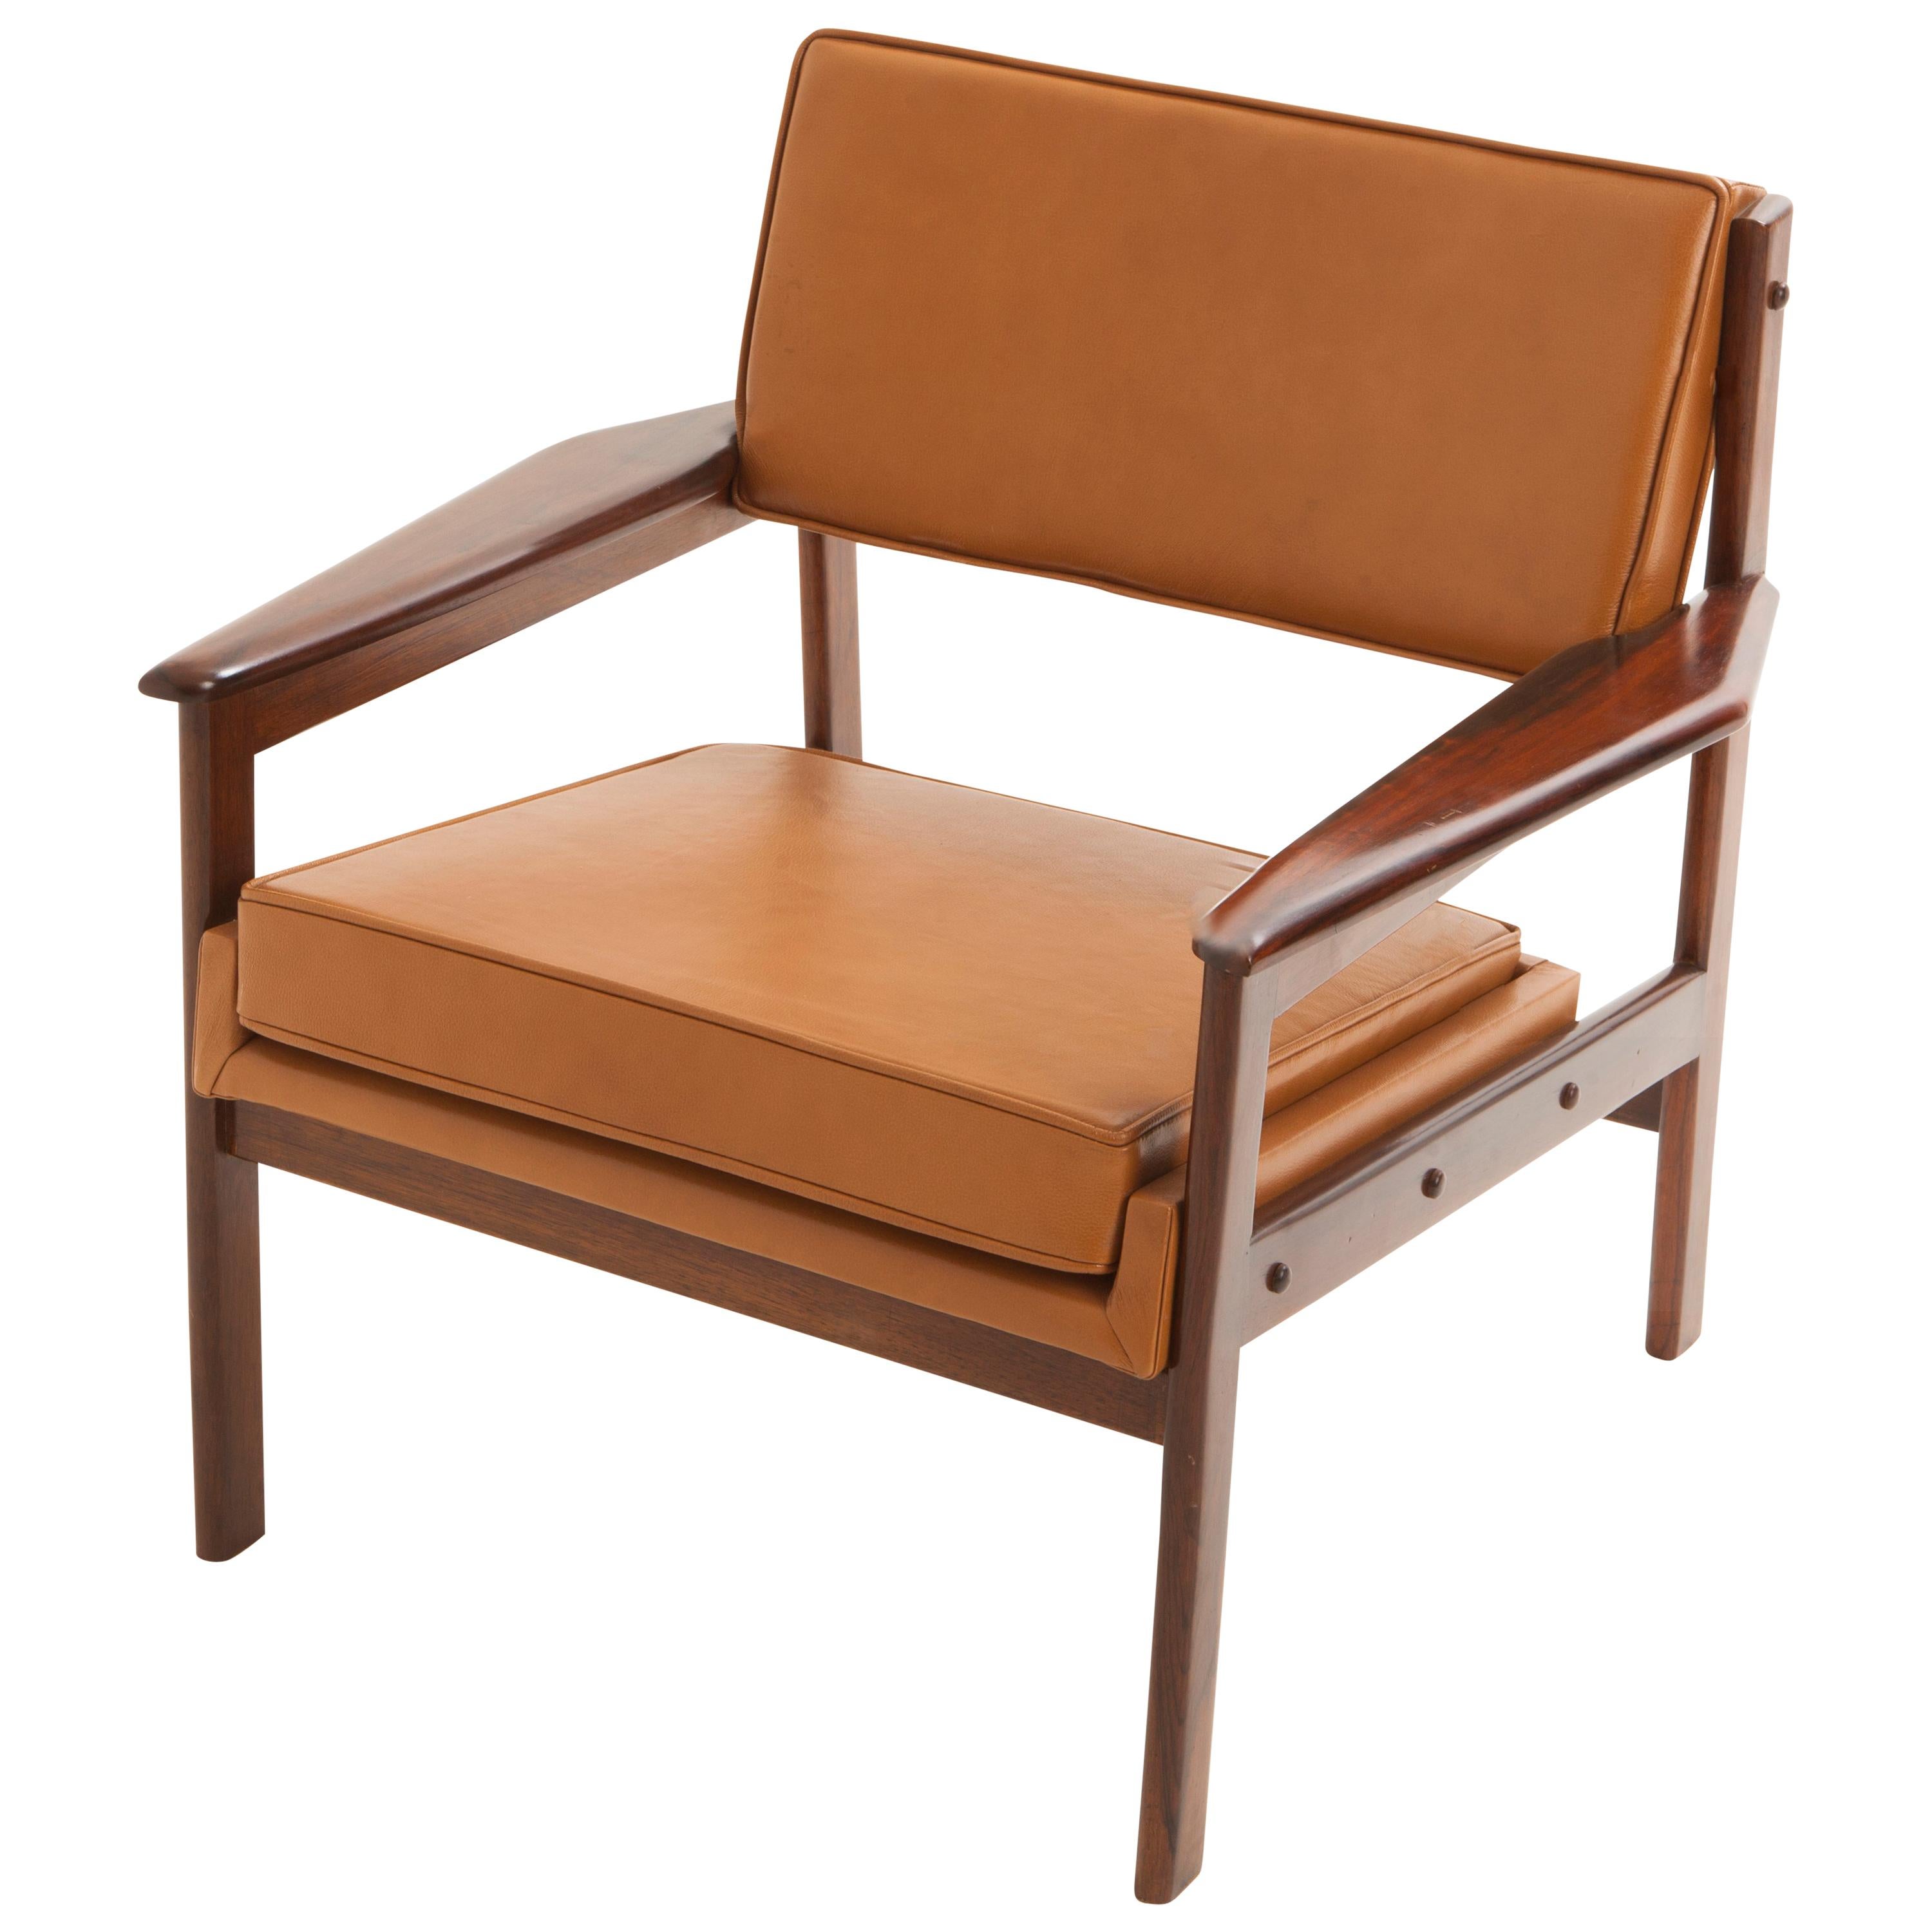 Set of 2 Mid-Century Modern Drummond Armchair by Sergio Rodrigues, Brazil 1950's